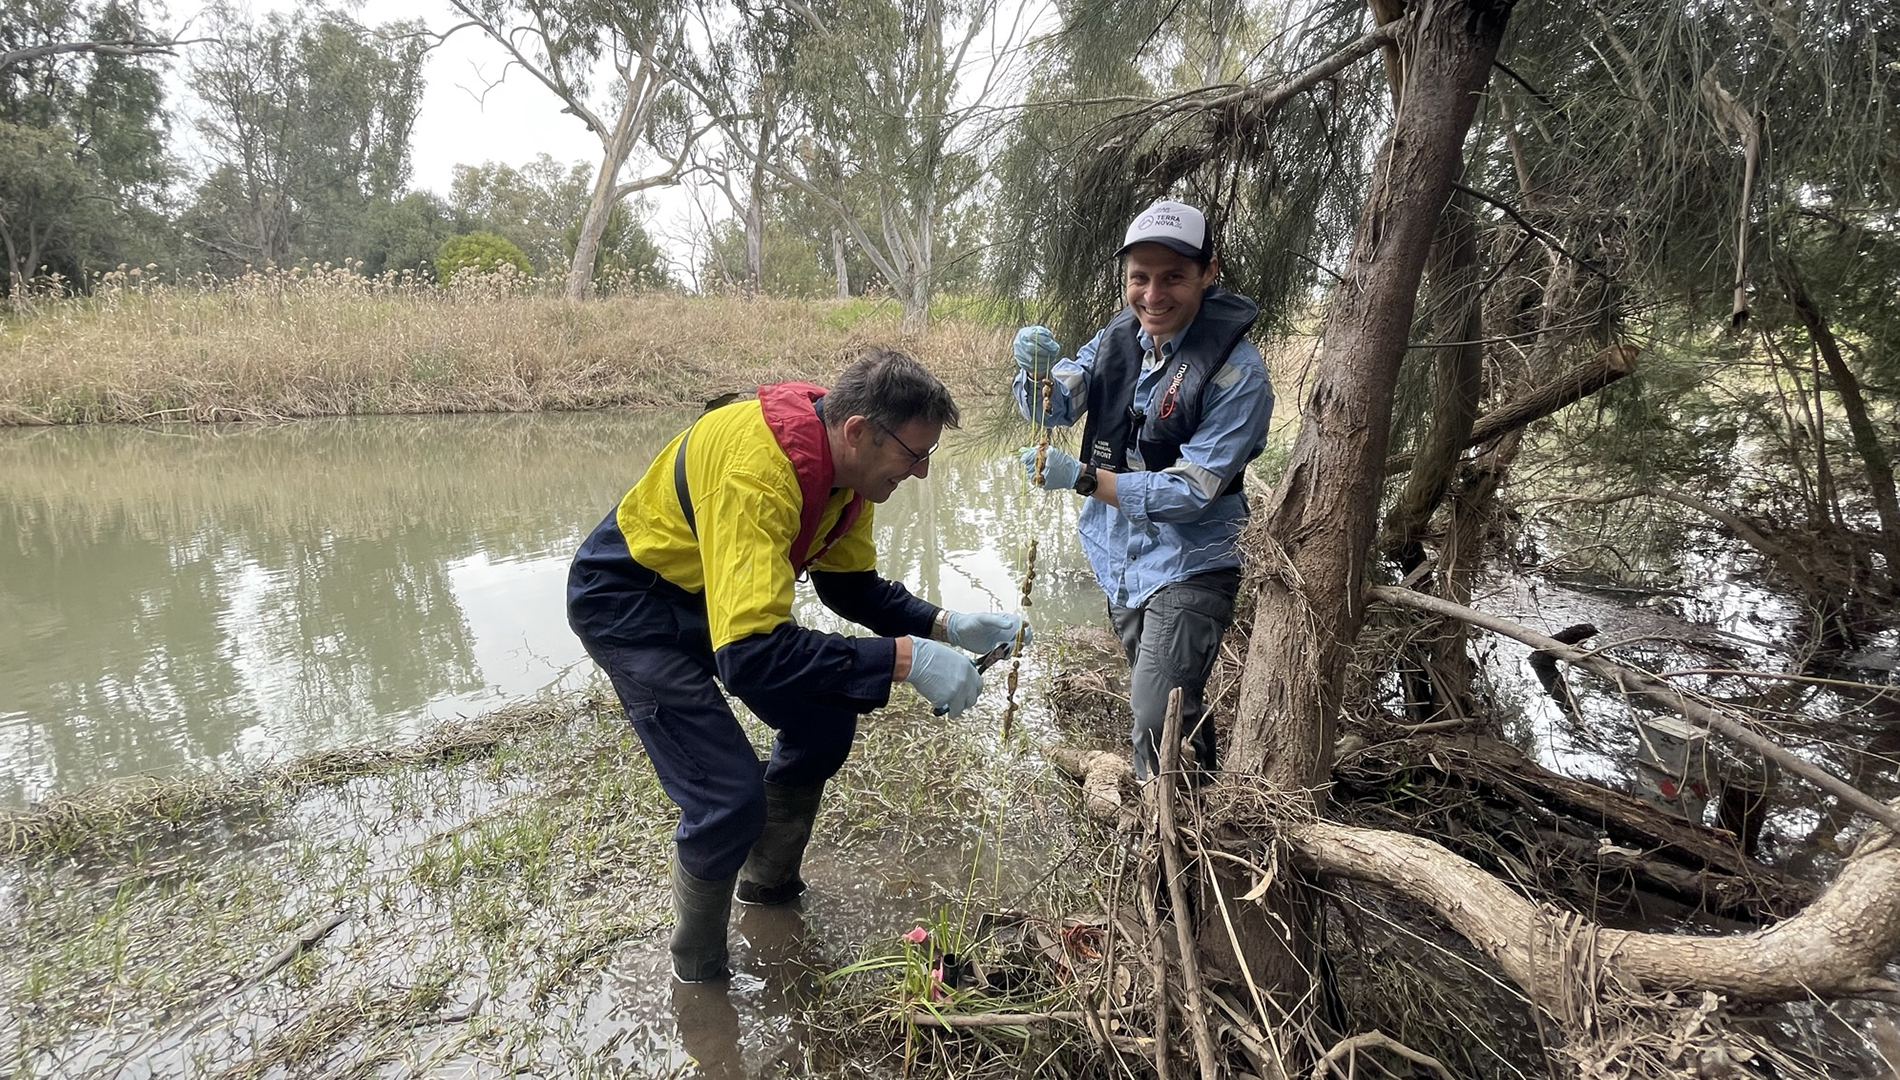 Sampling sediment bags for microbial impacts due to groundwater level changes. Photo: Kathryn Korbel (Macquarie University, 2022).